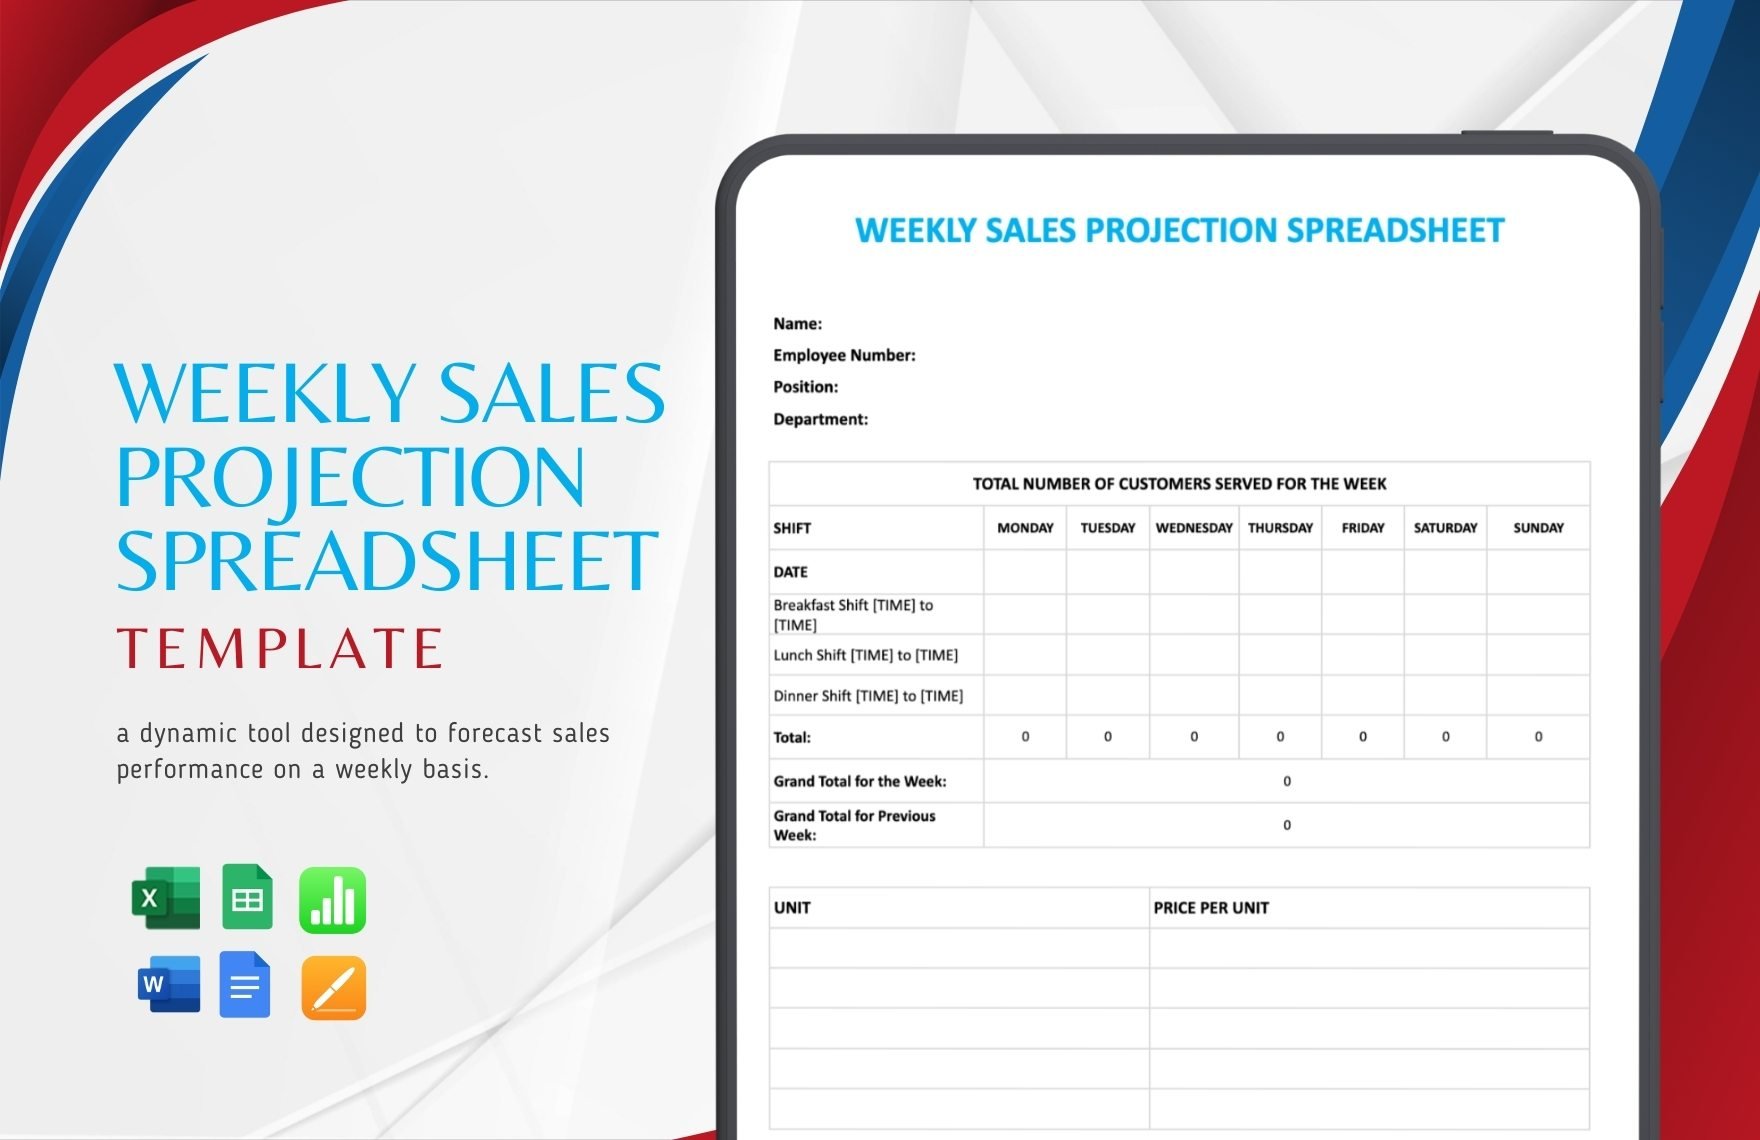 Weekly Sales Projection Spreadsheet Template